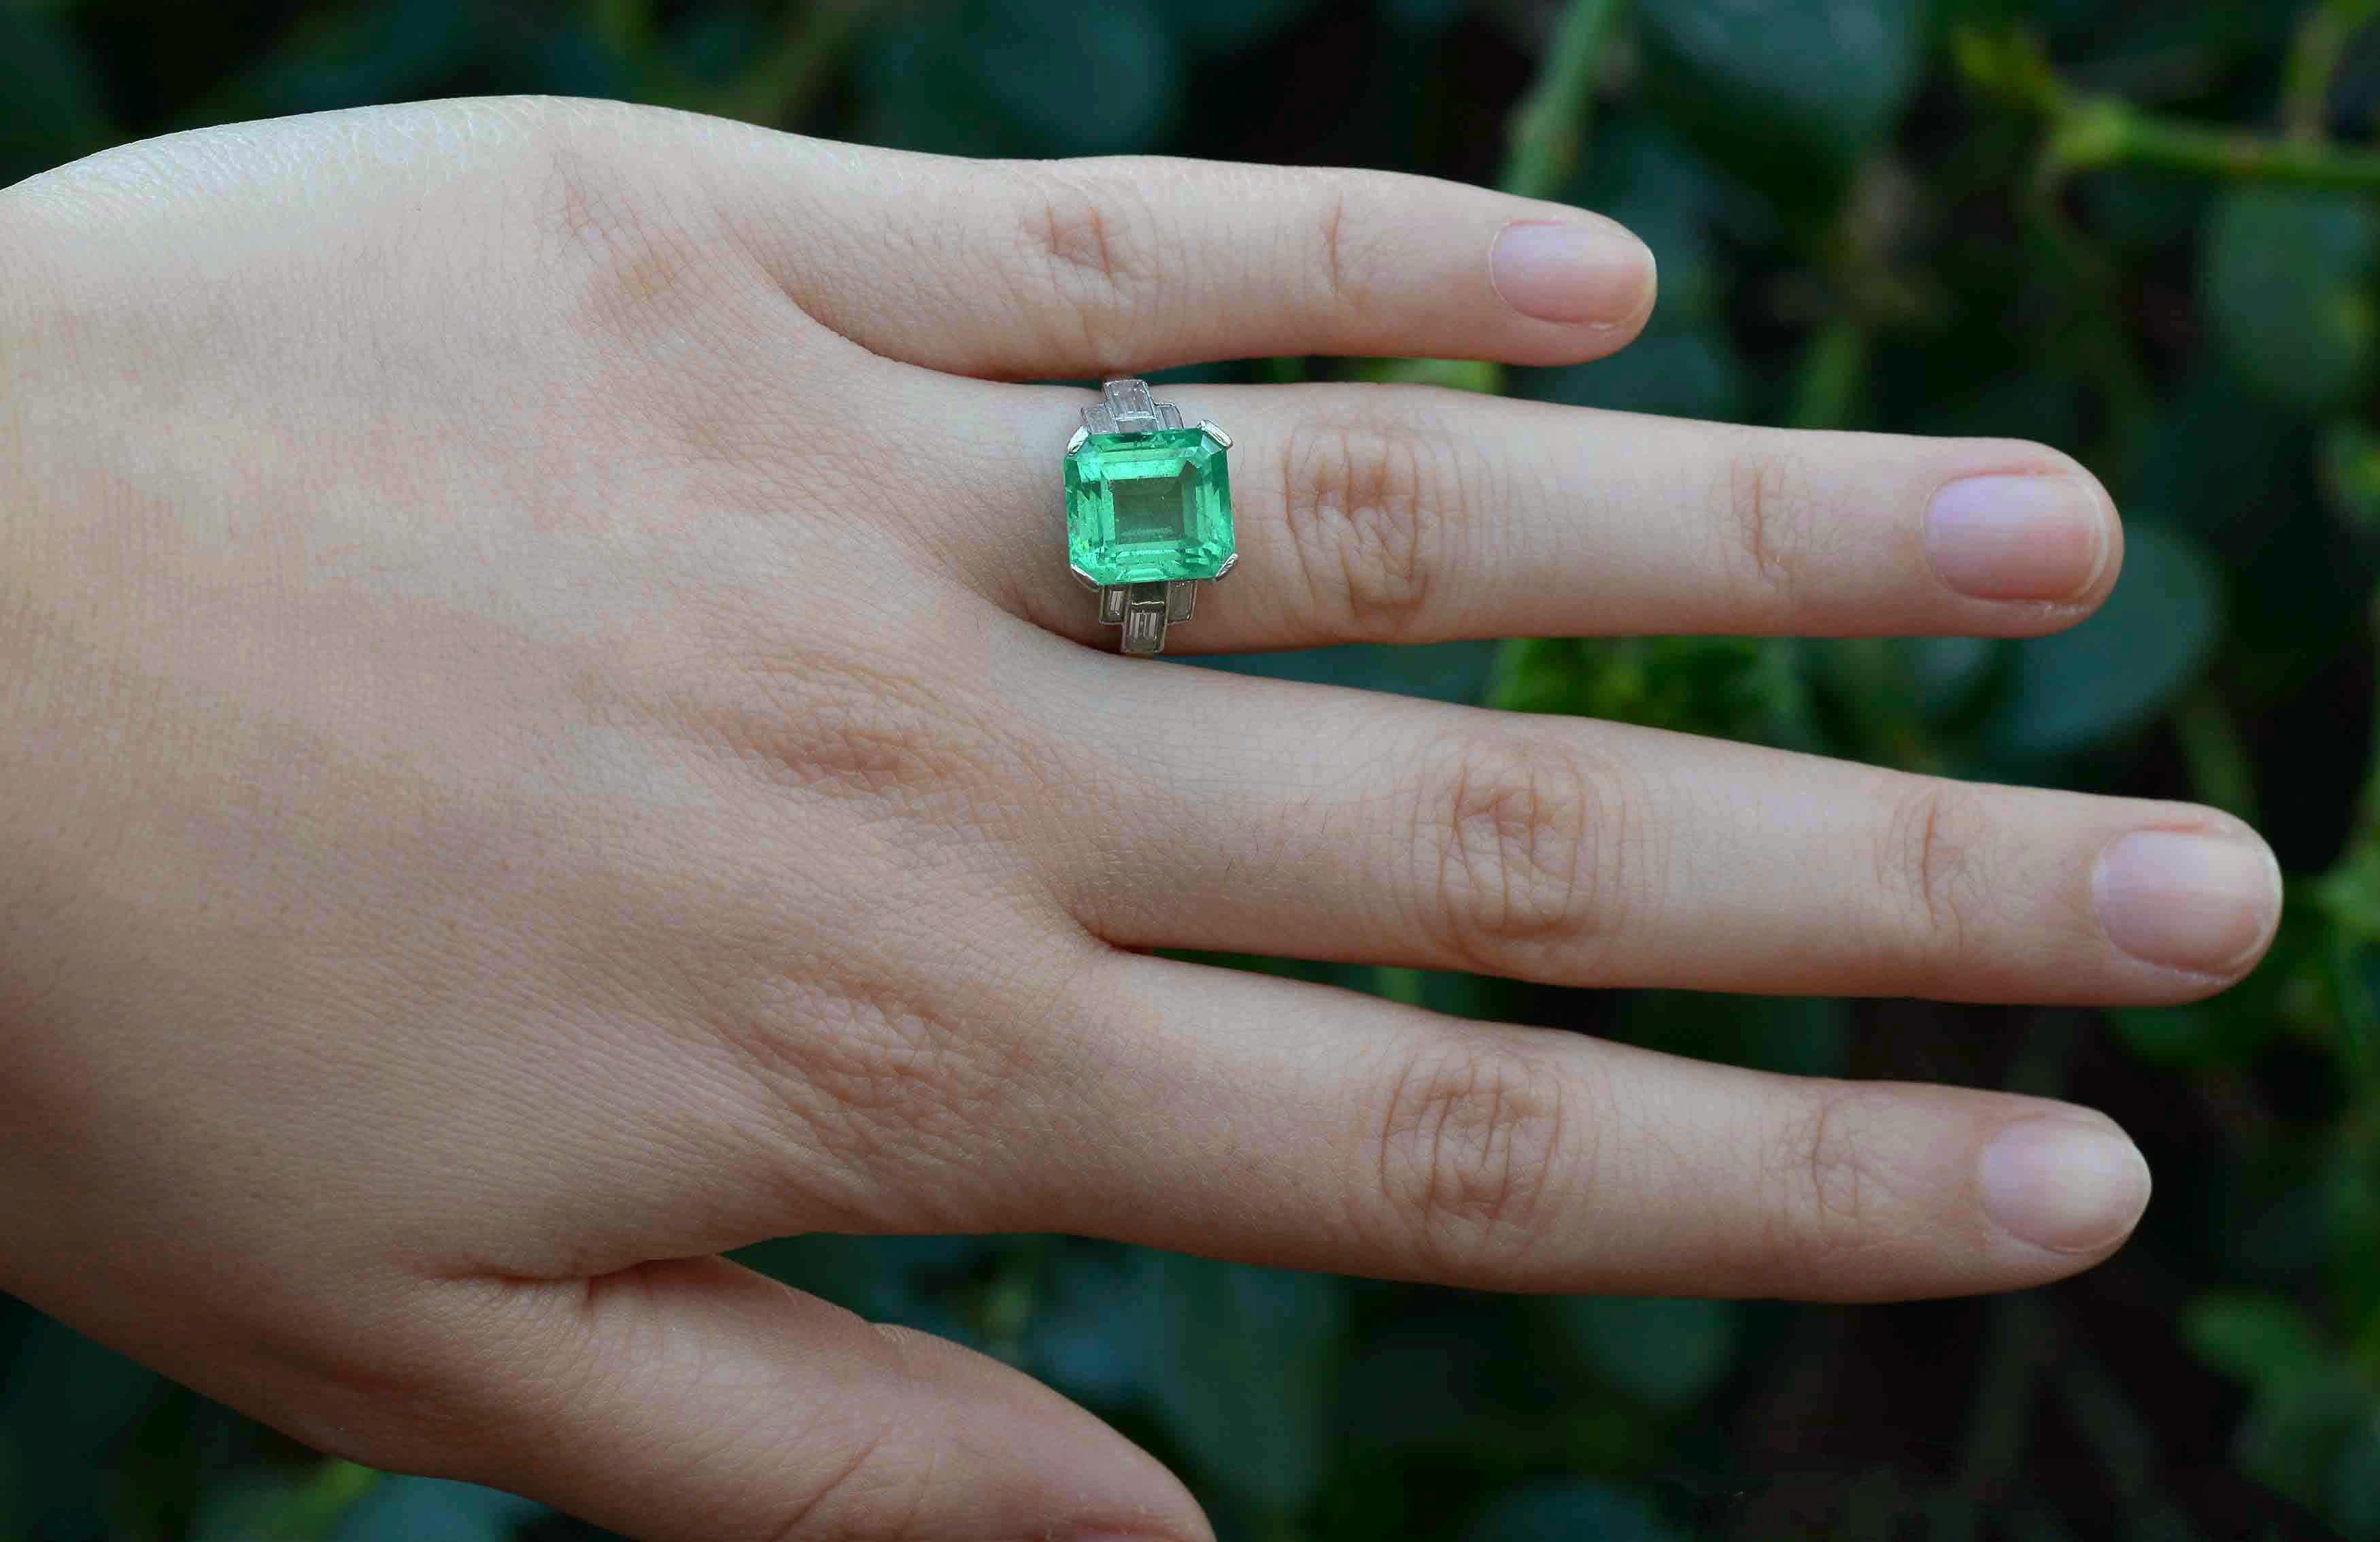 The Palm Springs Art Deco Engagement Ring. Glowing with an inner fire, this spectacular, Certified 5.47 Ct Colombian Emerald is sure to make all jewels green with envy. A classic Emerald cut set in a sleek, minimalist platinum setting enriched by